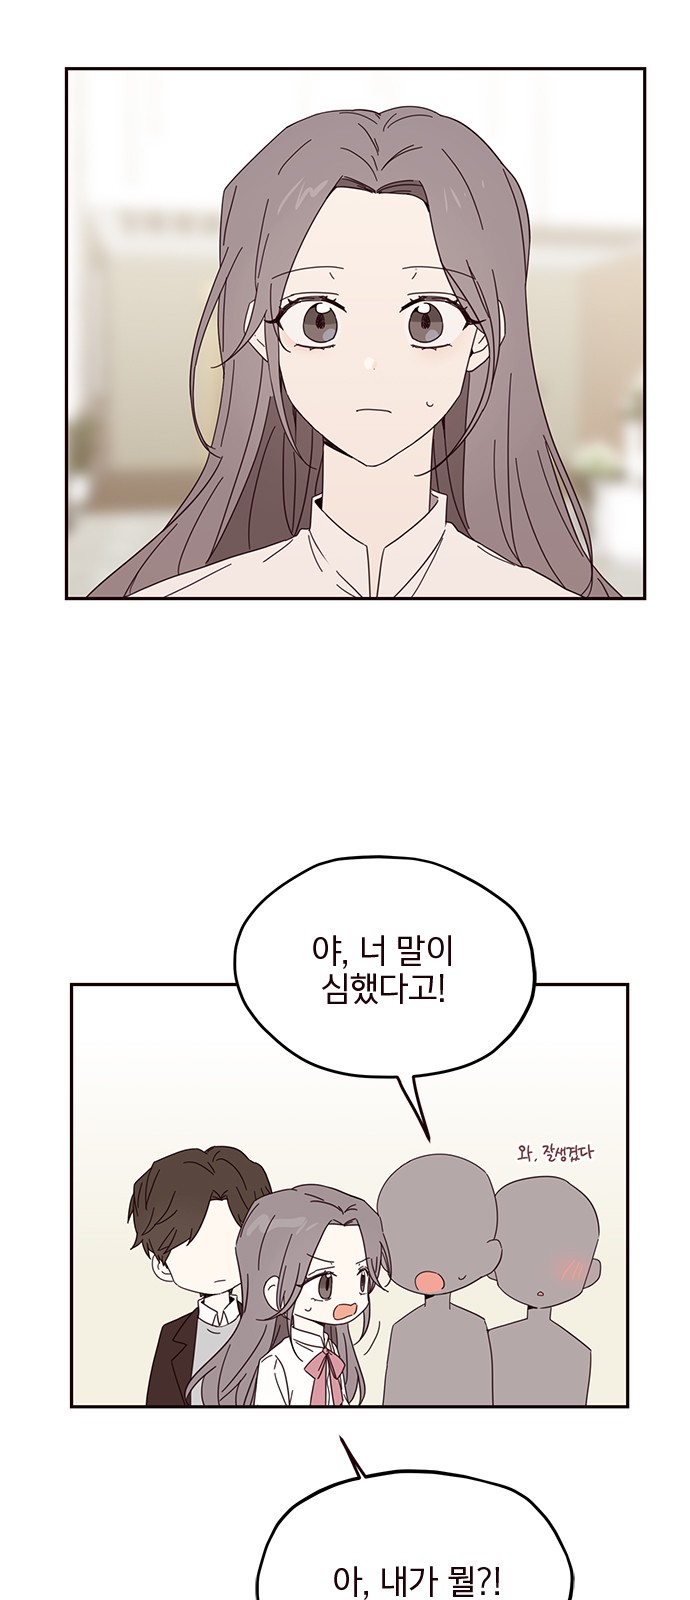 Threads of Love (The Fool of Love and Peace) - Chapter 30 - Page 2